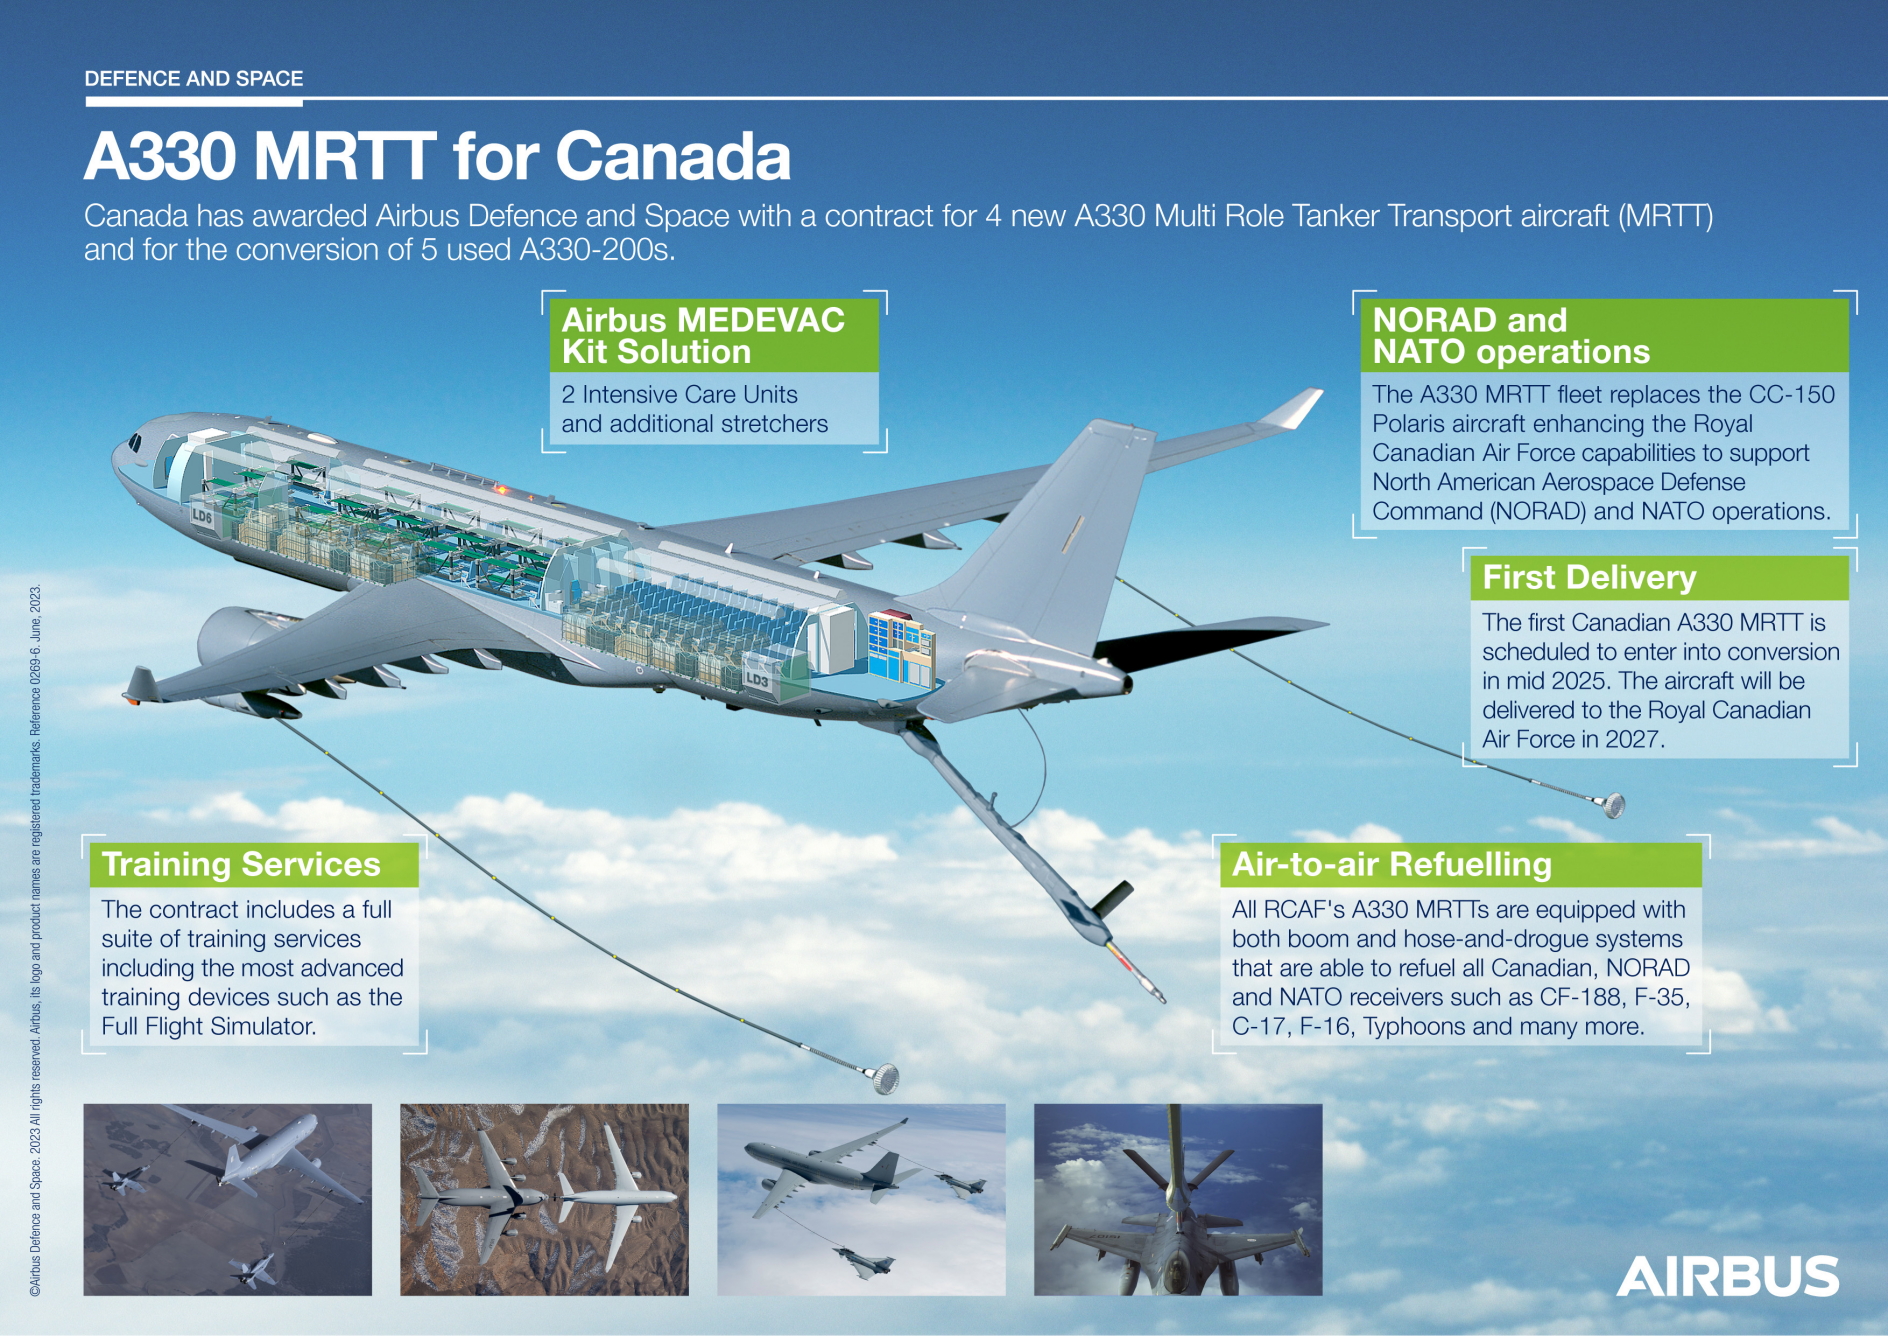 Infographic about Canada's newly ordered A330 MRTTs. Click to enlarge.